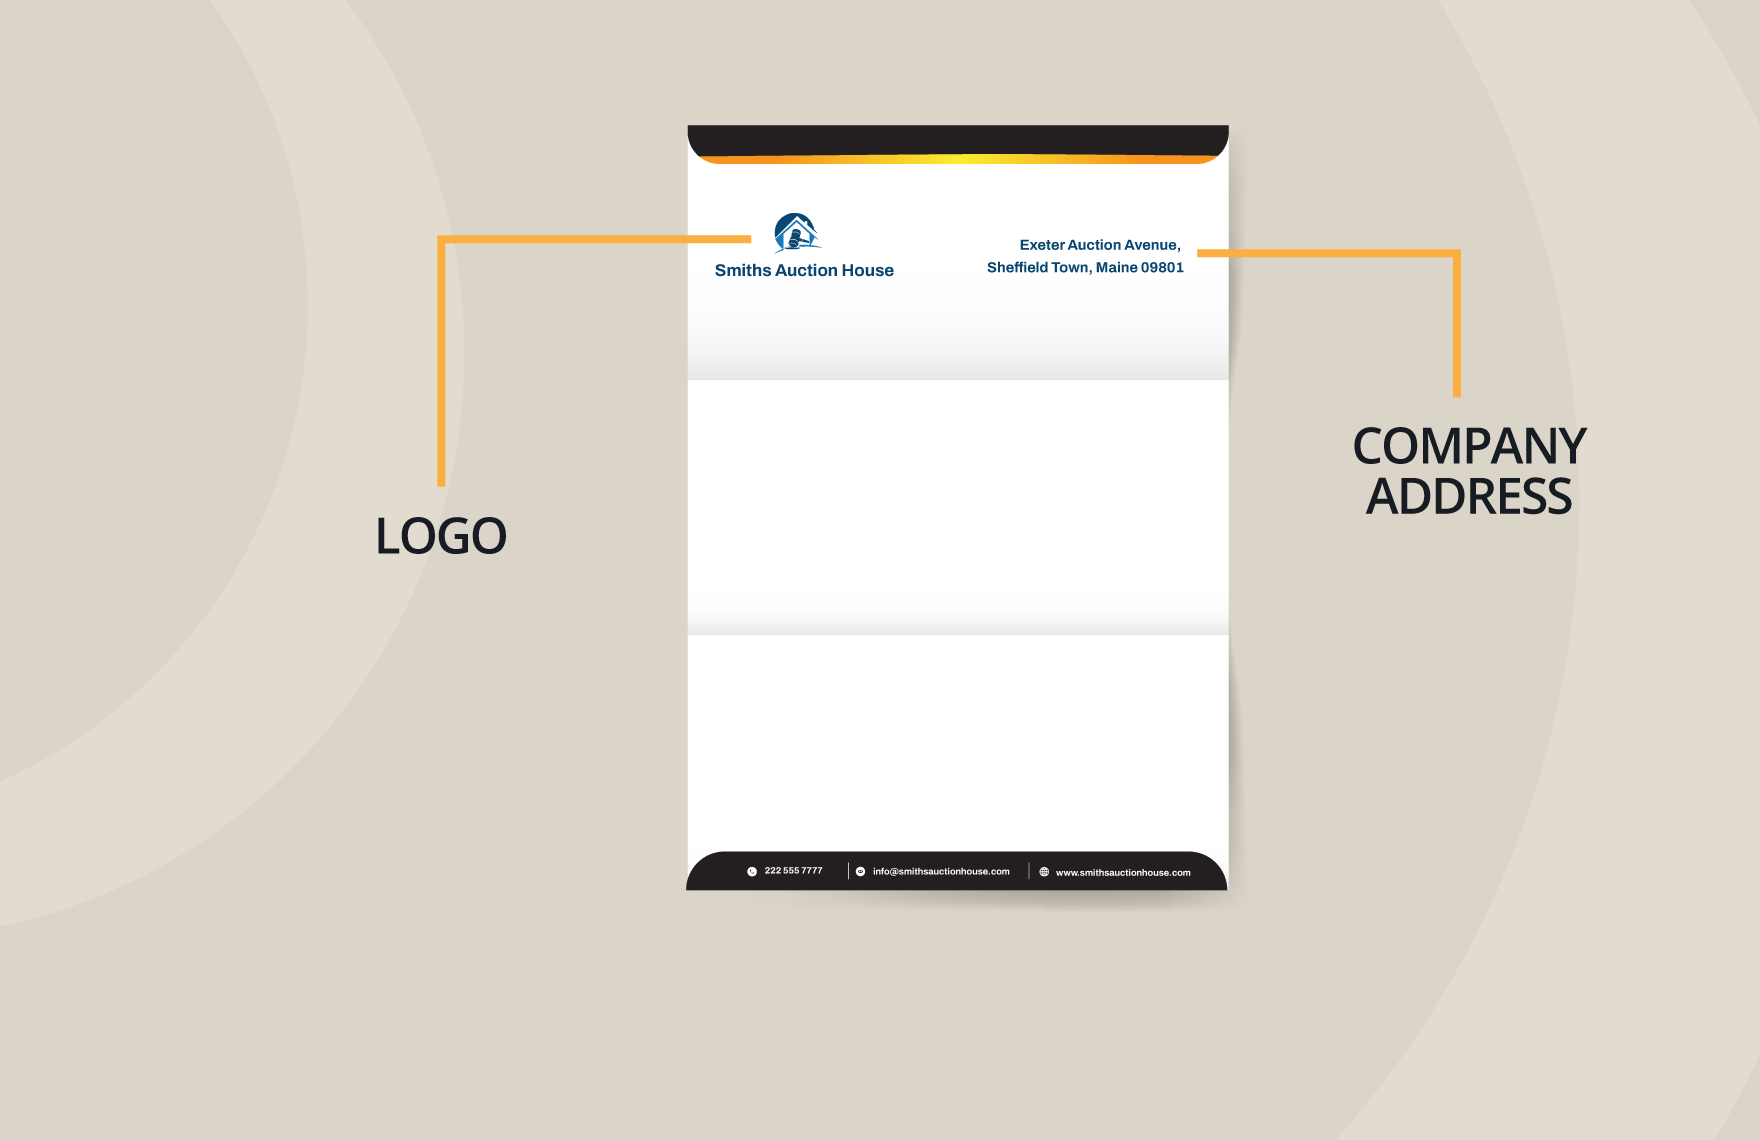 Letterhead with Envelope Template